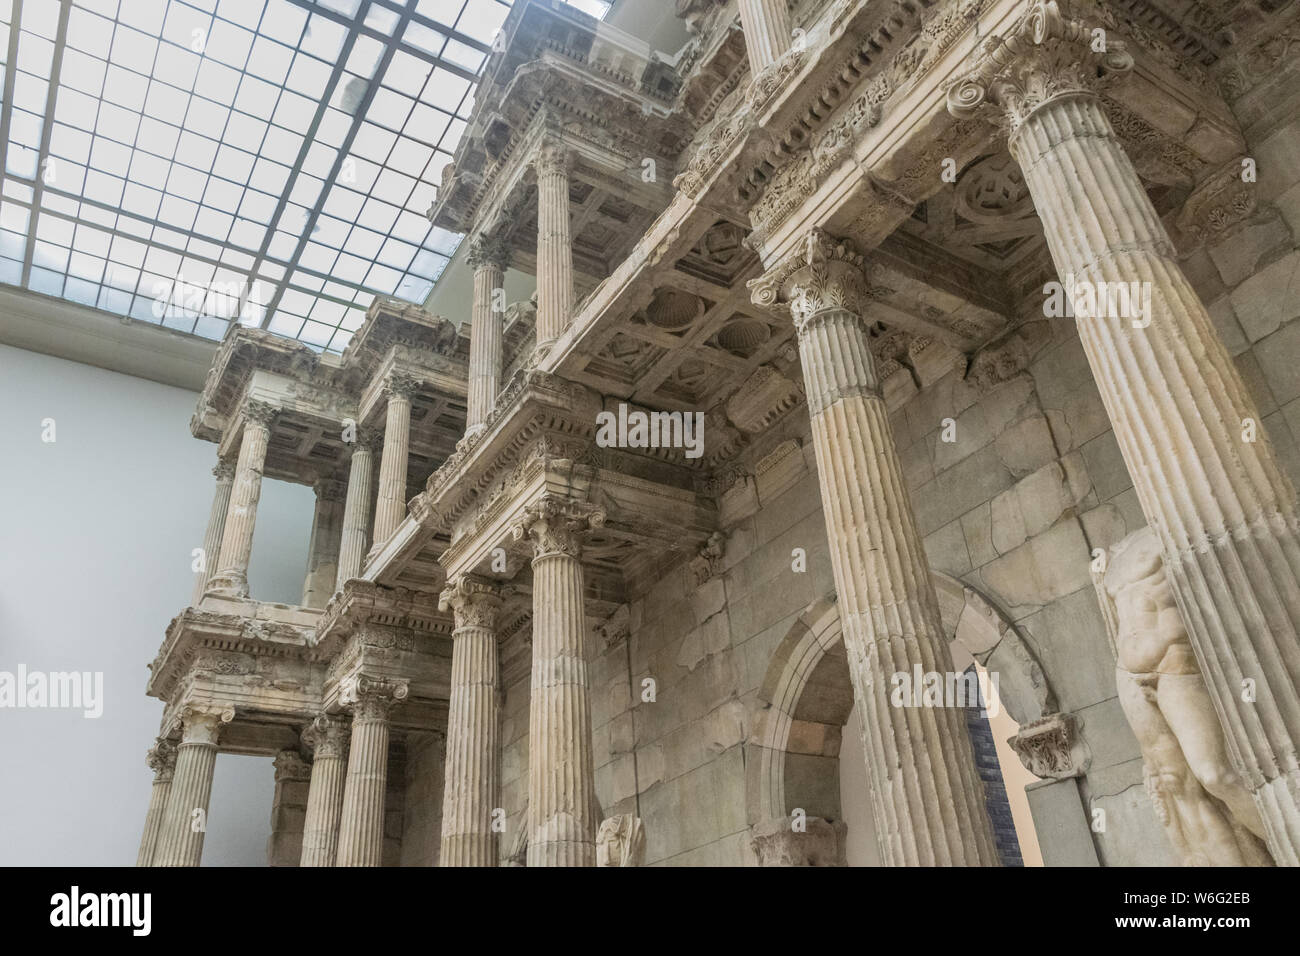 BERLIN, GERMANY - SEPTEMBER 26, 2018: Close up and detailed view of the Architecture of antiquity, the Market gate of Miletus with greek columns Stock Photo